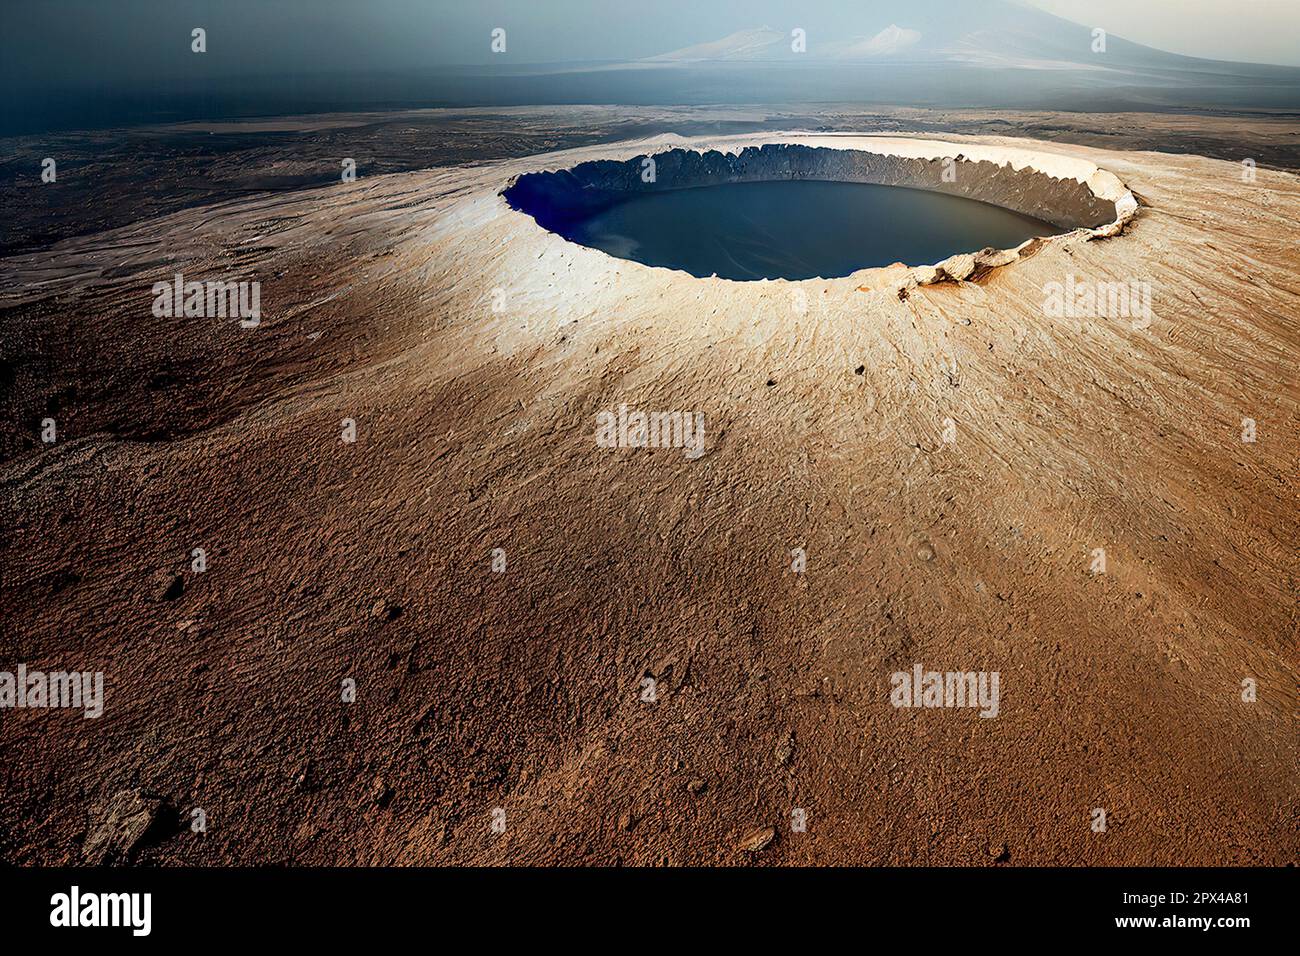 Large Impact Crater Filled with Water on a Barren Landscape Stock Photo